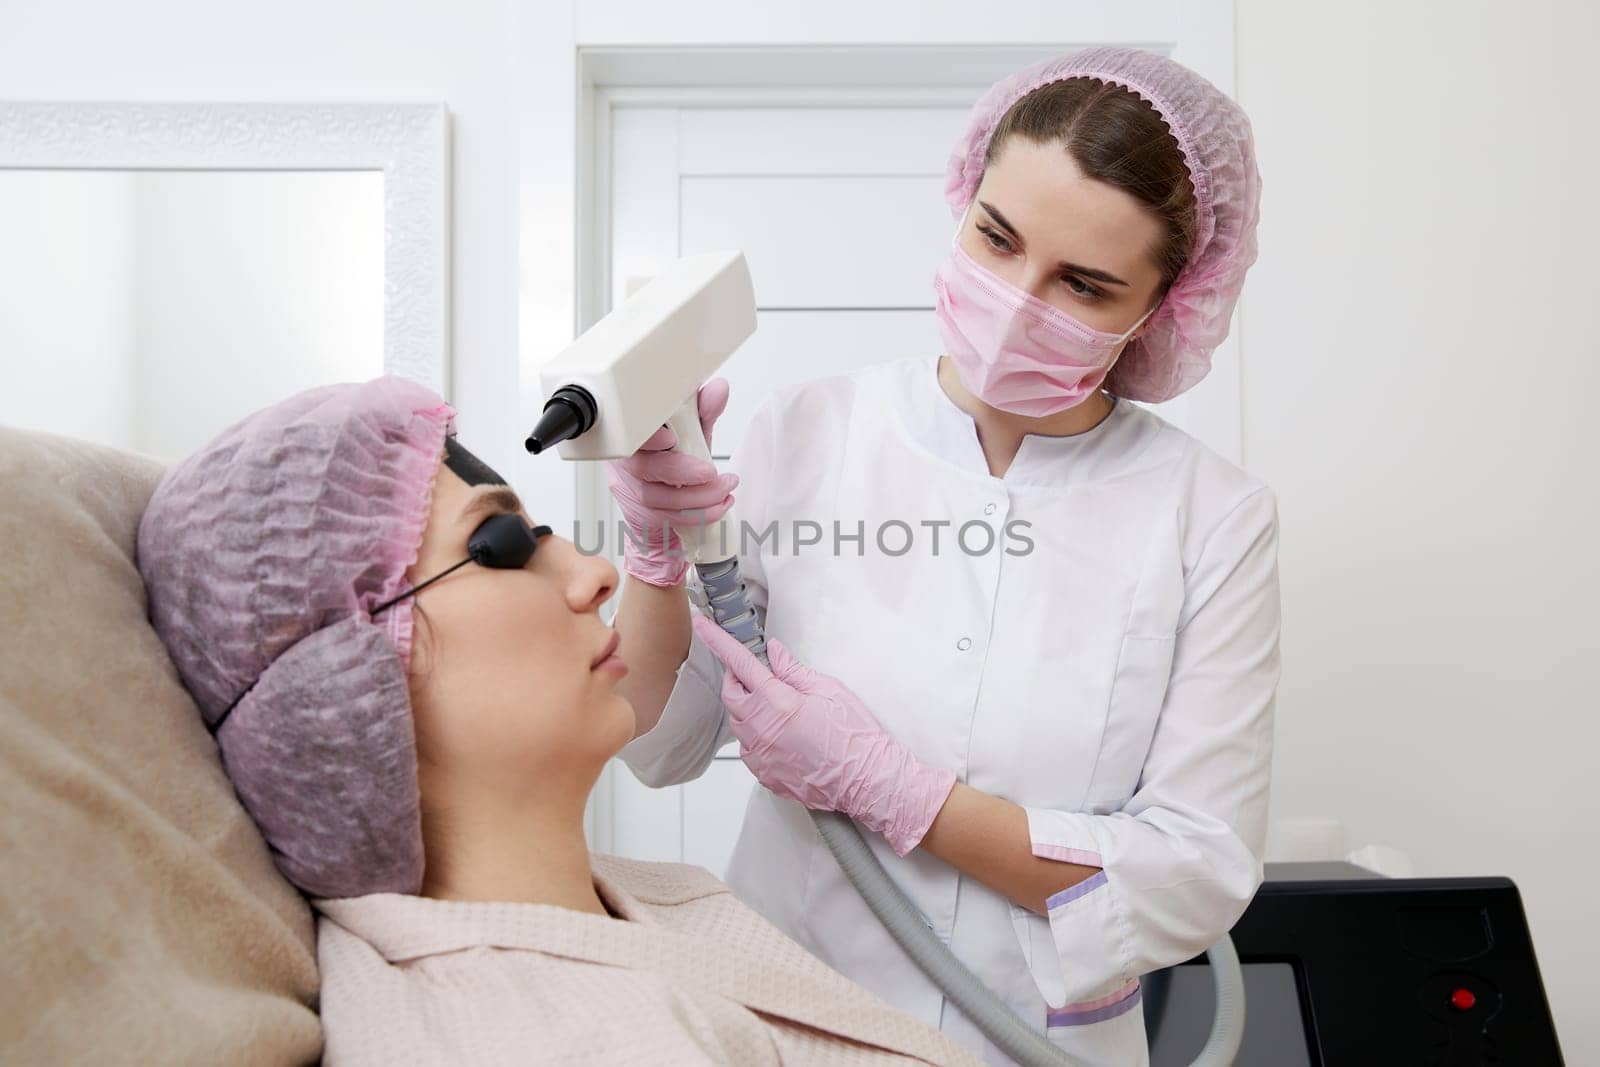 Carbon peeling in beauty salon. Cosmetologist applying black mask on the face of beautiful woman for carbon peeling